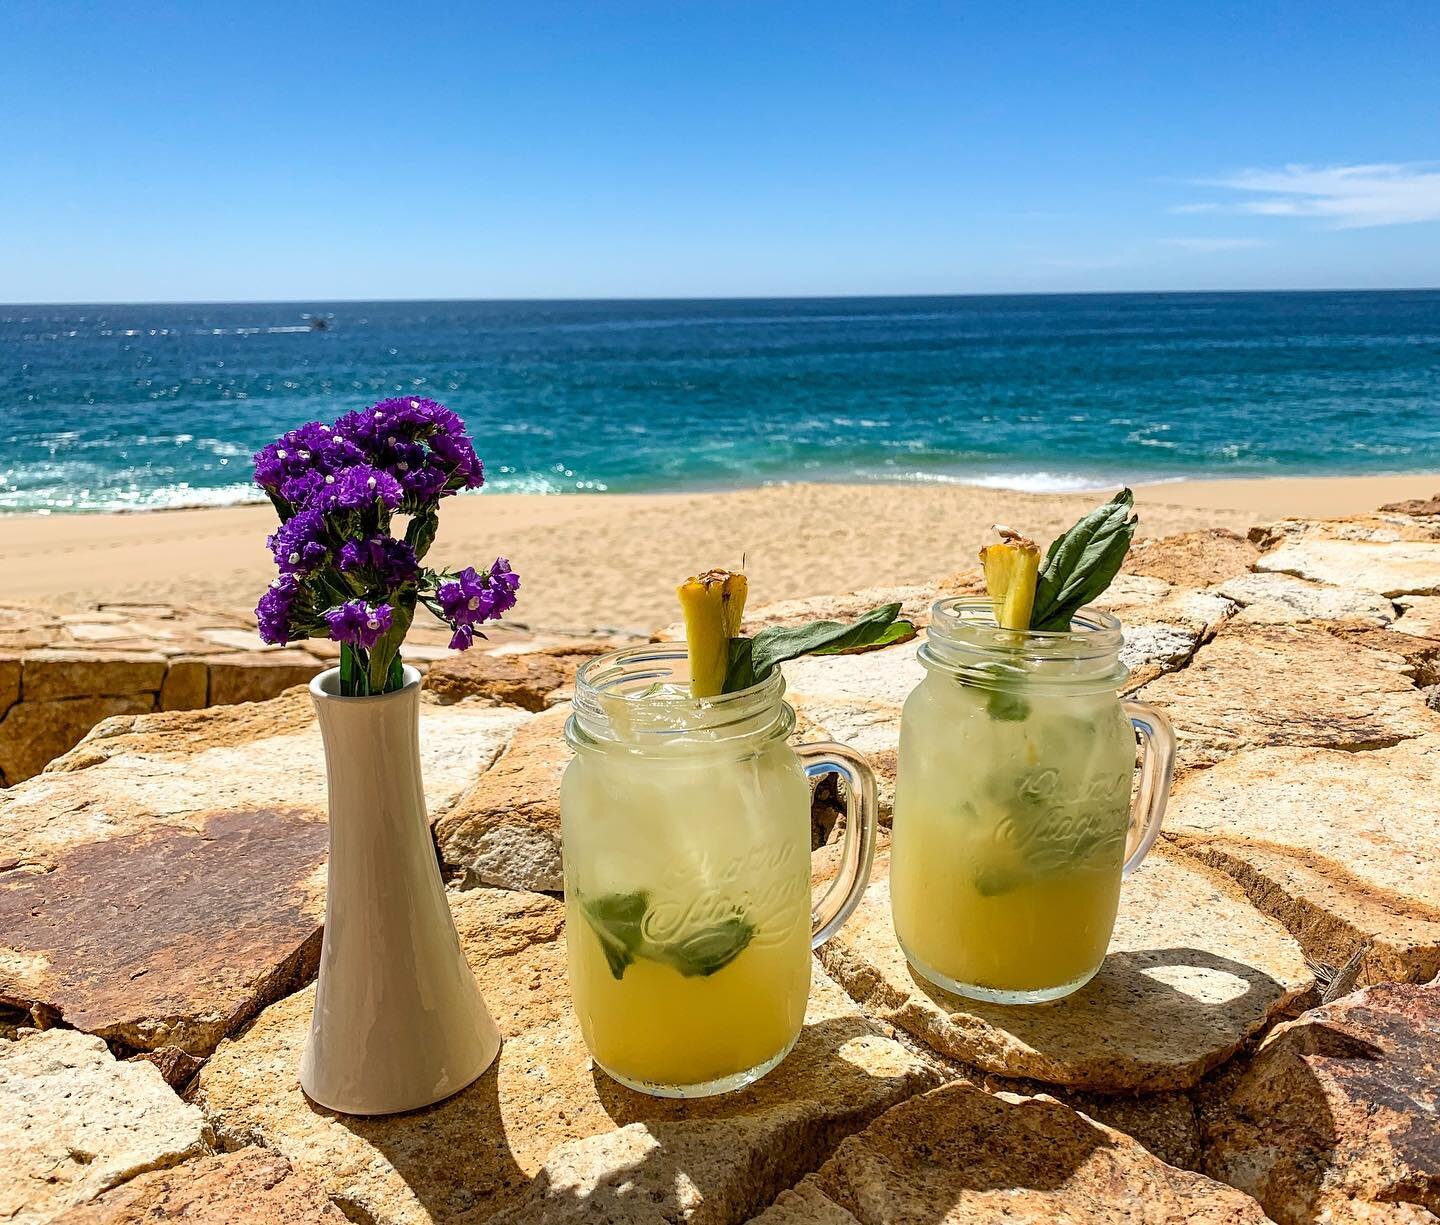 We&rsquo;ll take our Sunday cocktails with a side of whale watching please.

🆆🅷🅰🆃 Mezcalitas infused with pineapple and basil &mdash; the perfect weekend refresher. Enjoy their farm-to-table menu packed with local and seasonal ingredients everyda